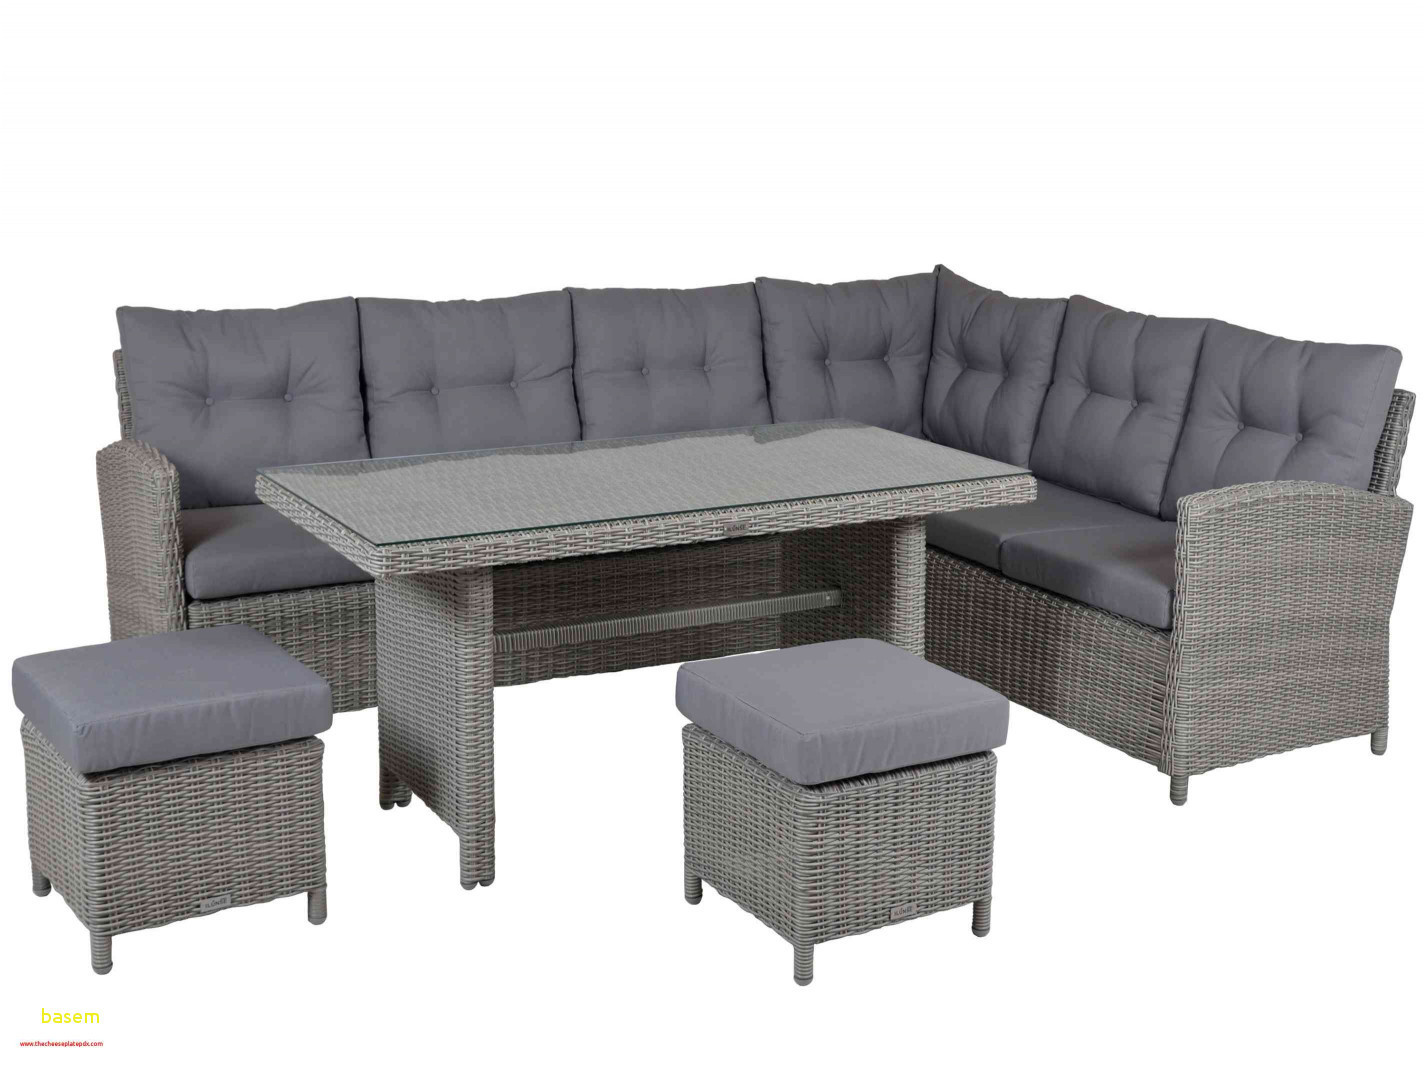 Sessel Mit Bettfunktion
 Couch Mit Sessel Frisch Sessel Mit Bettfunktion sofa Mit